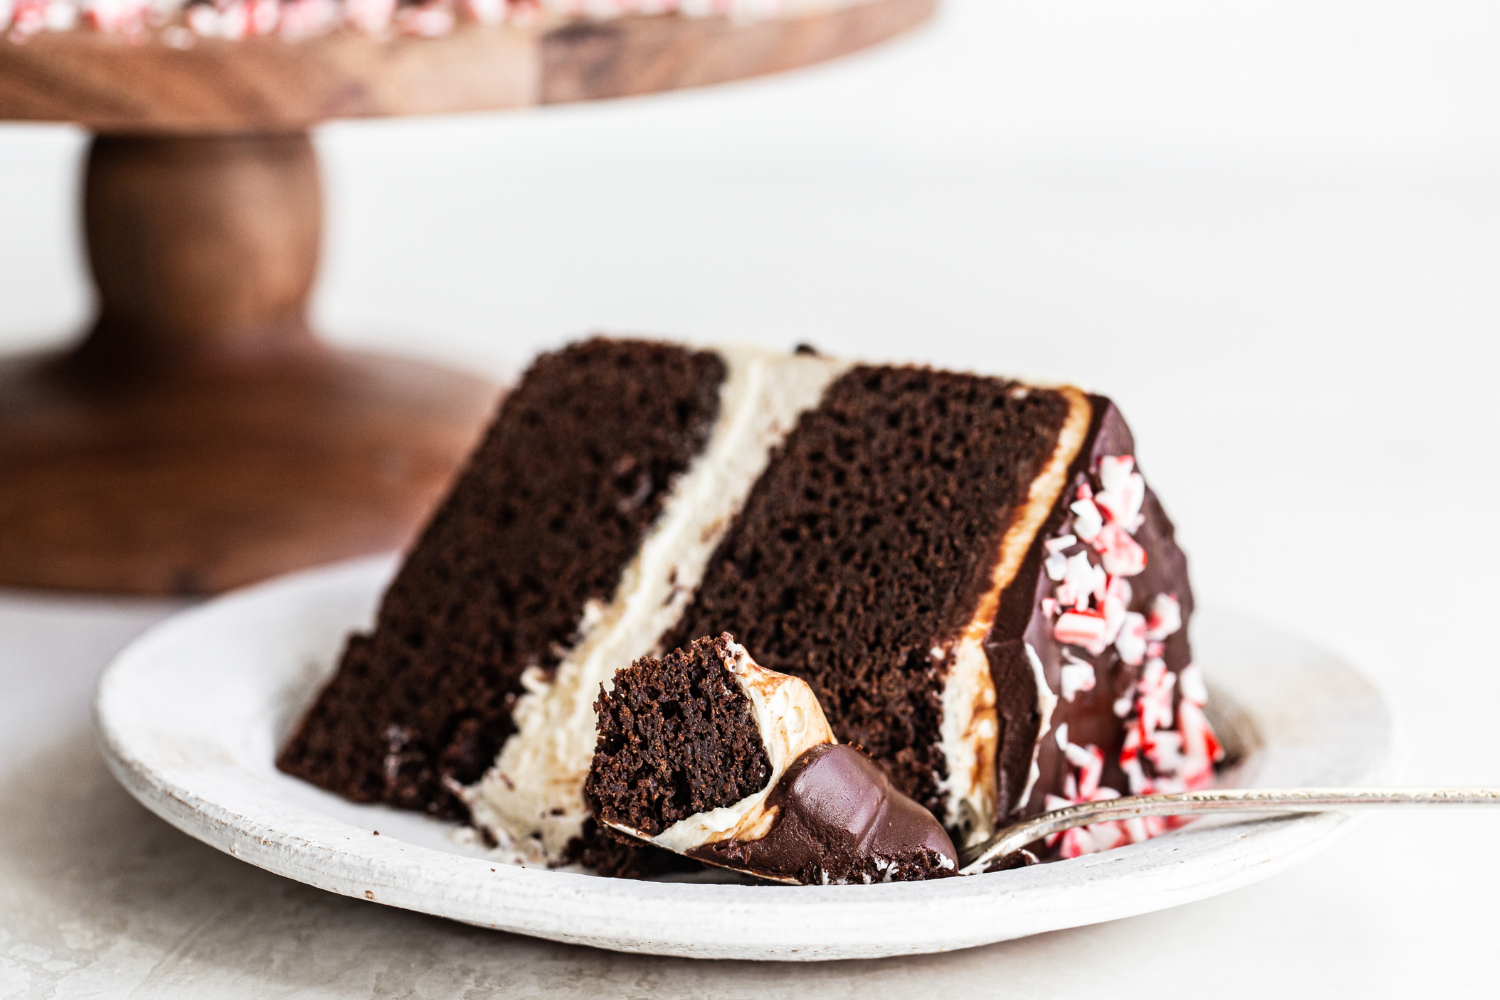 a slice of Peppermint Chocolate Cake on a plate, ready to serve.